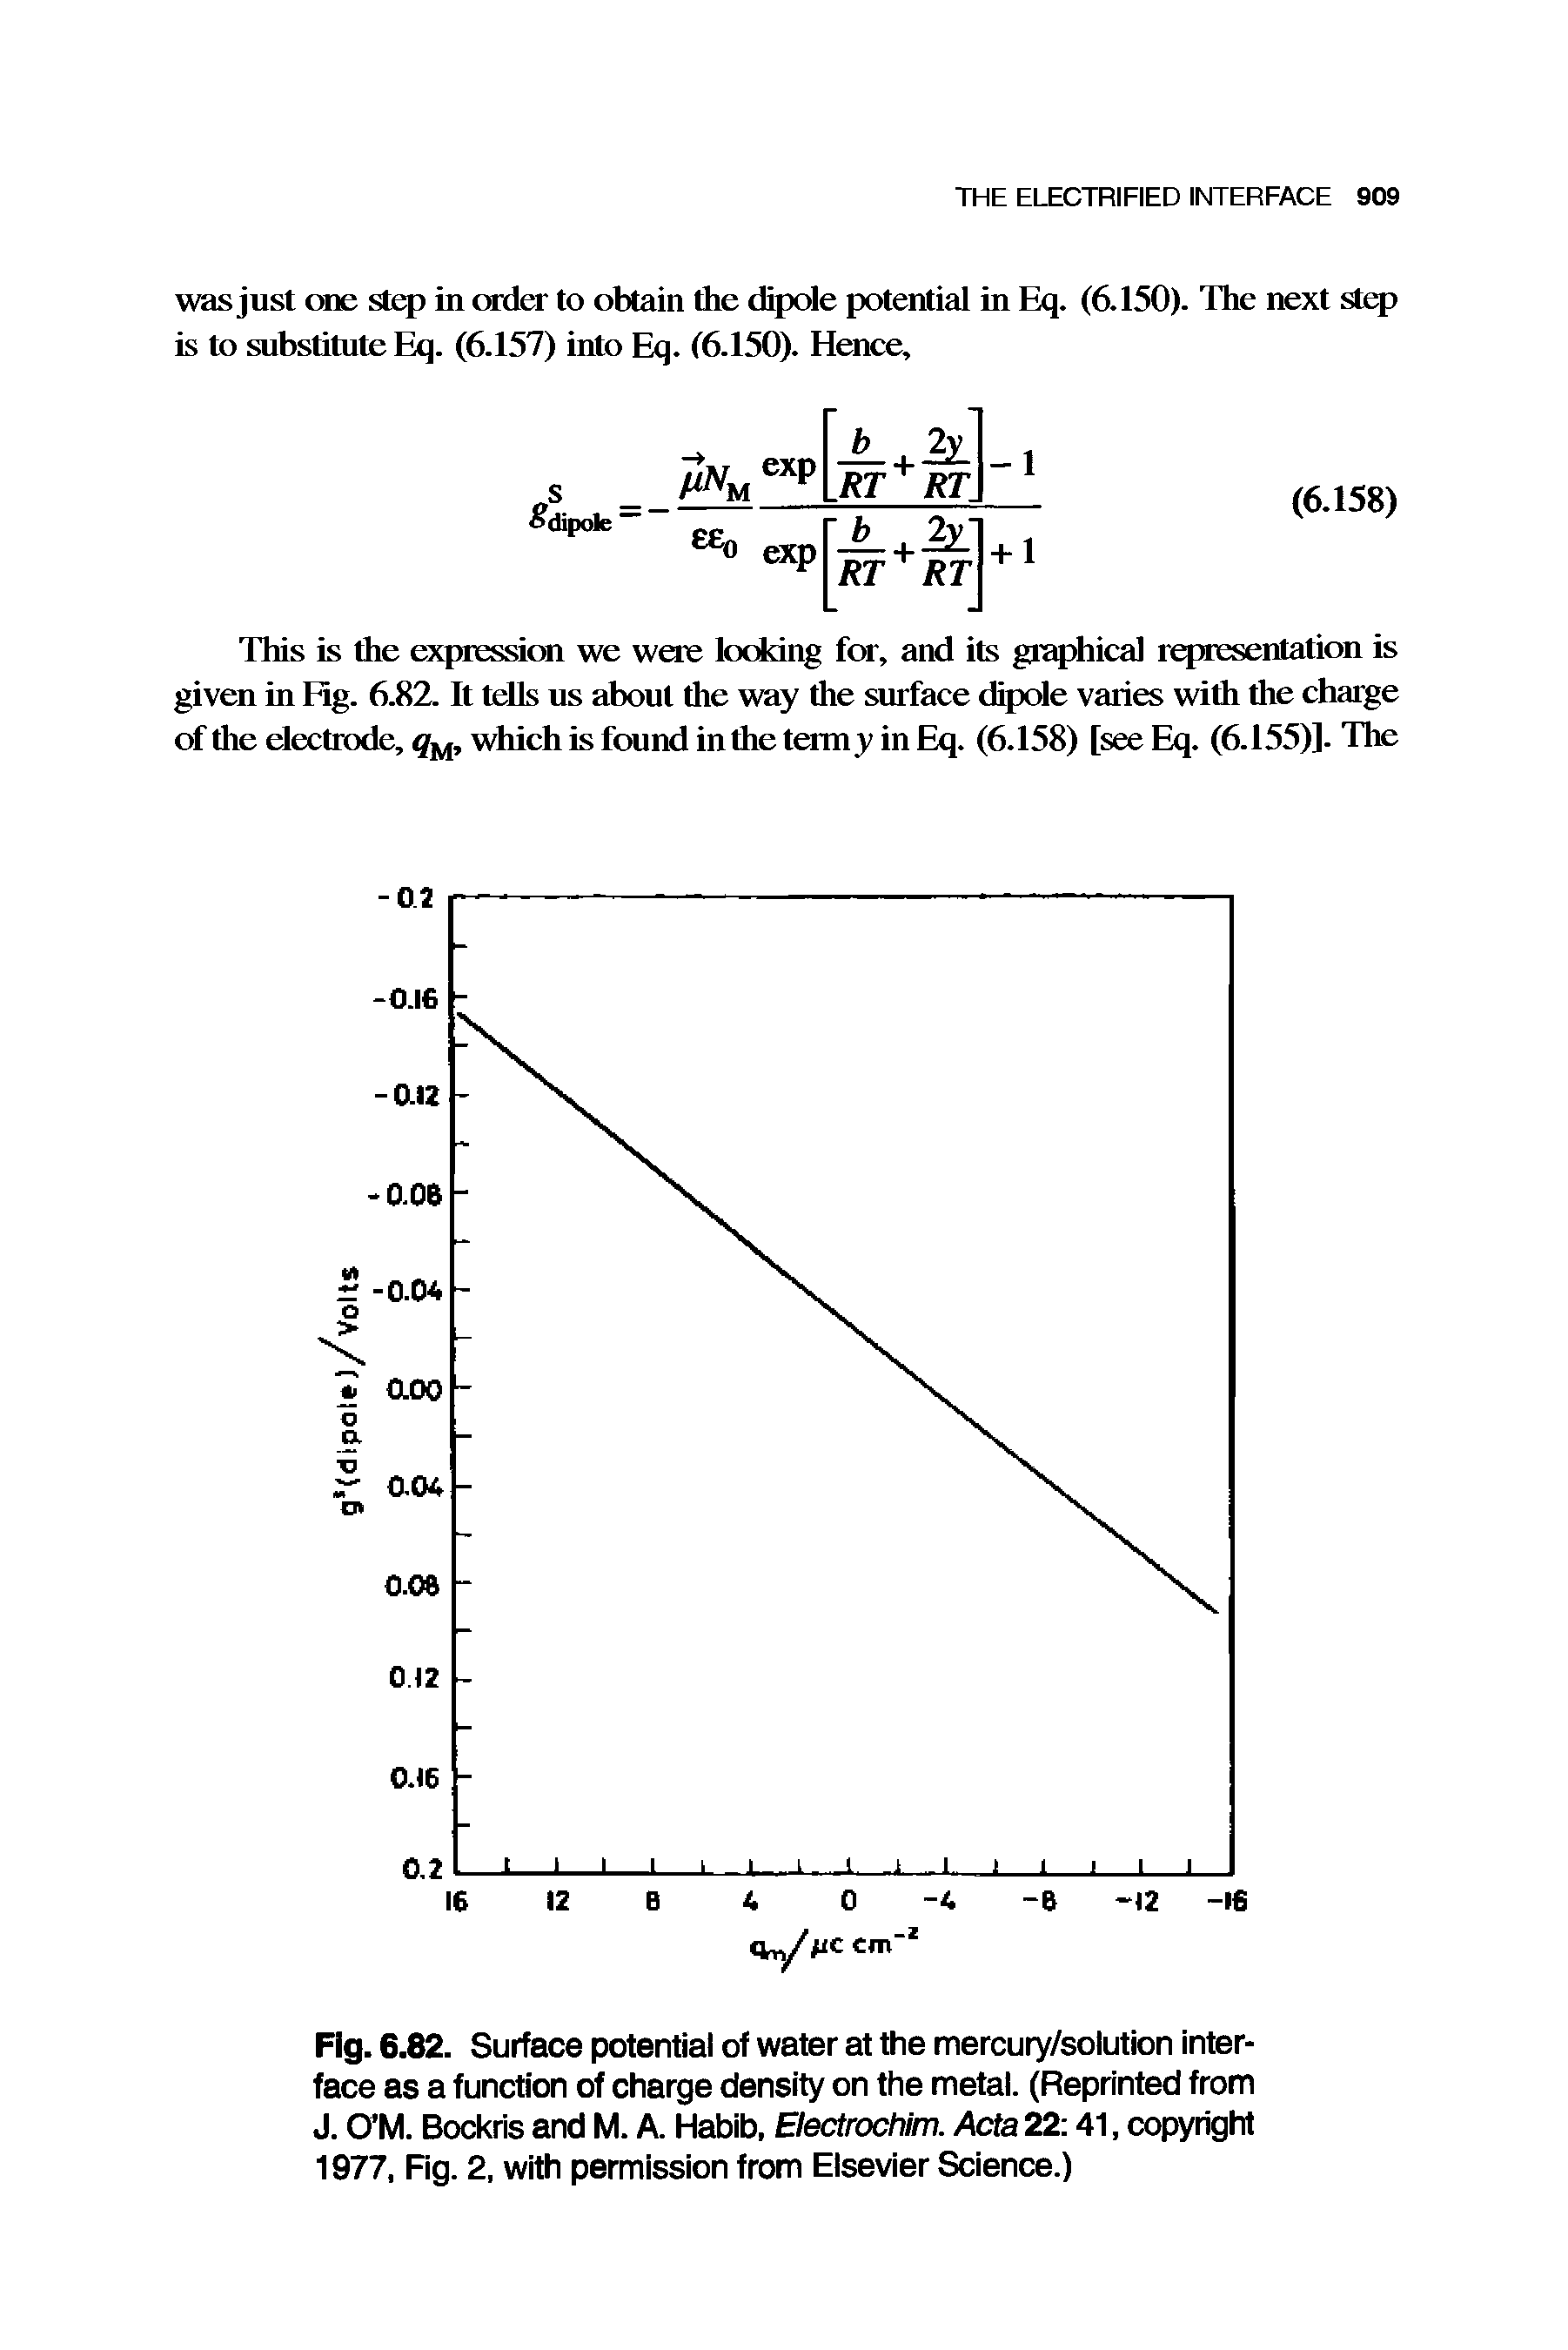 Fig. 6.82. Surface potential of water at the mercury/solution interface as a function of charge density on the metal. (Reprinted from J. O M. Bockris and M. A. Habib, Electrochim. Acta 22 41, copyright 1977, Fig. 2, with permission from Elsevier Science.)...